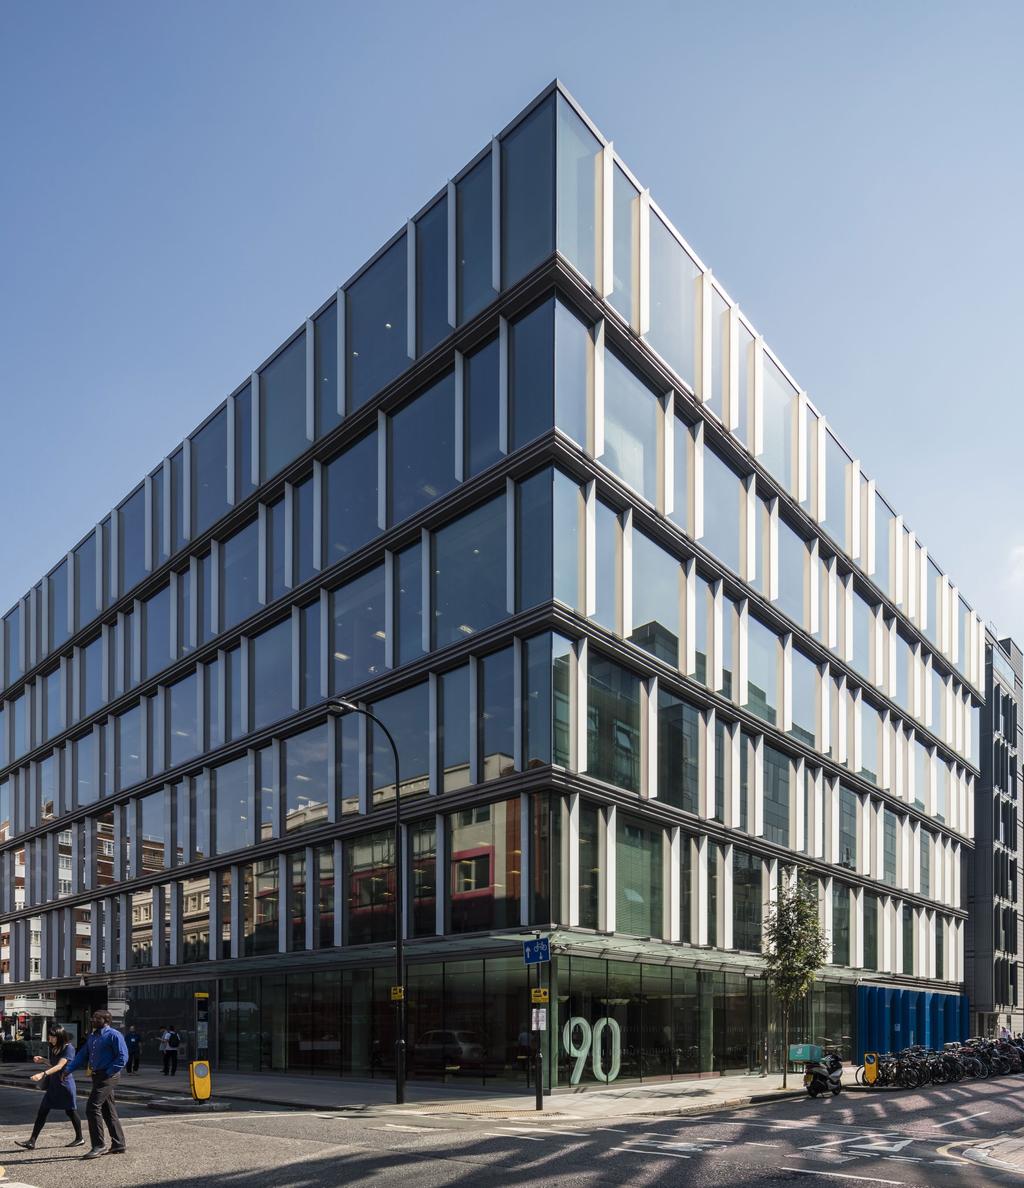 INTRODUCTION BUILDING Dominating the corner of Maple Street and Whitfield Street, the distinctive glazed elevations of 90 Whitfield Street create a sense of movement across the façades, catching the